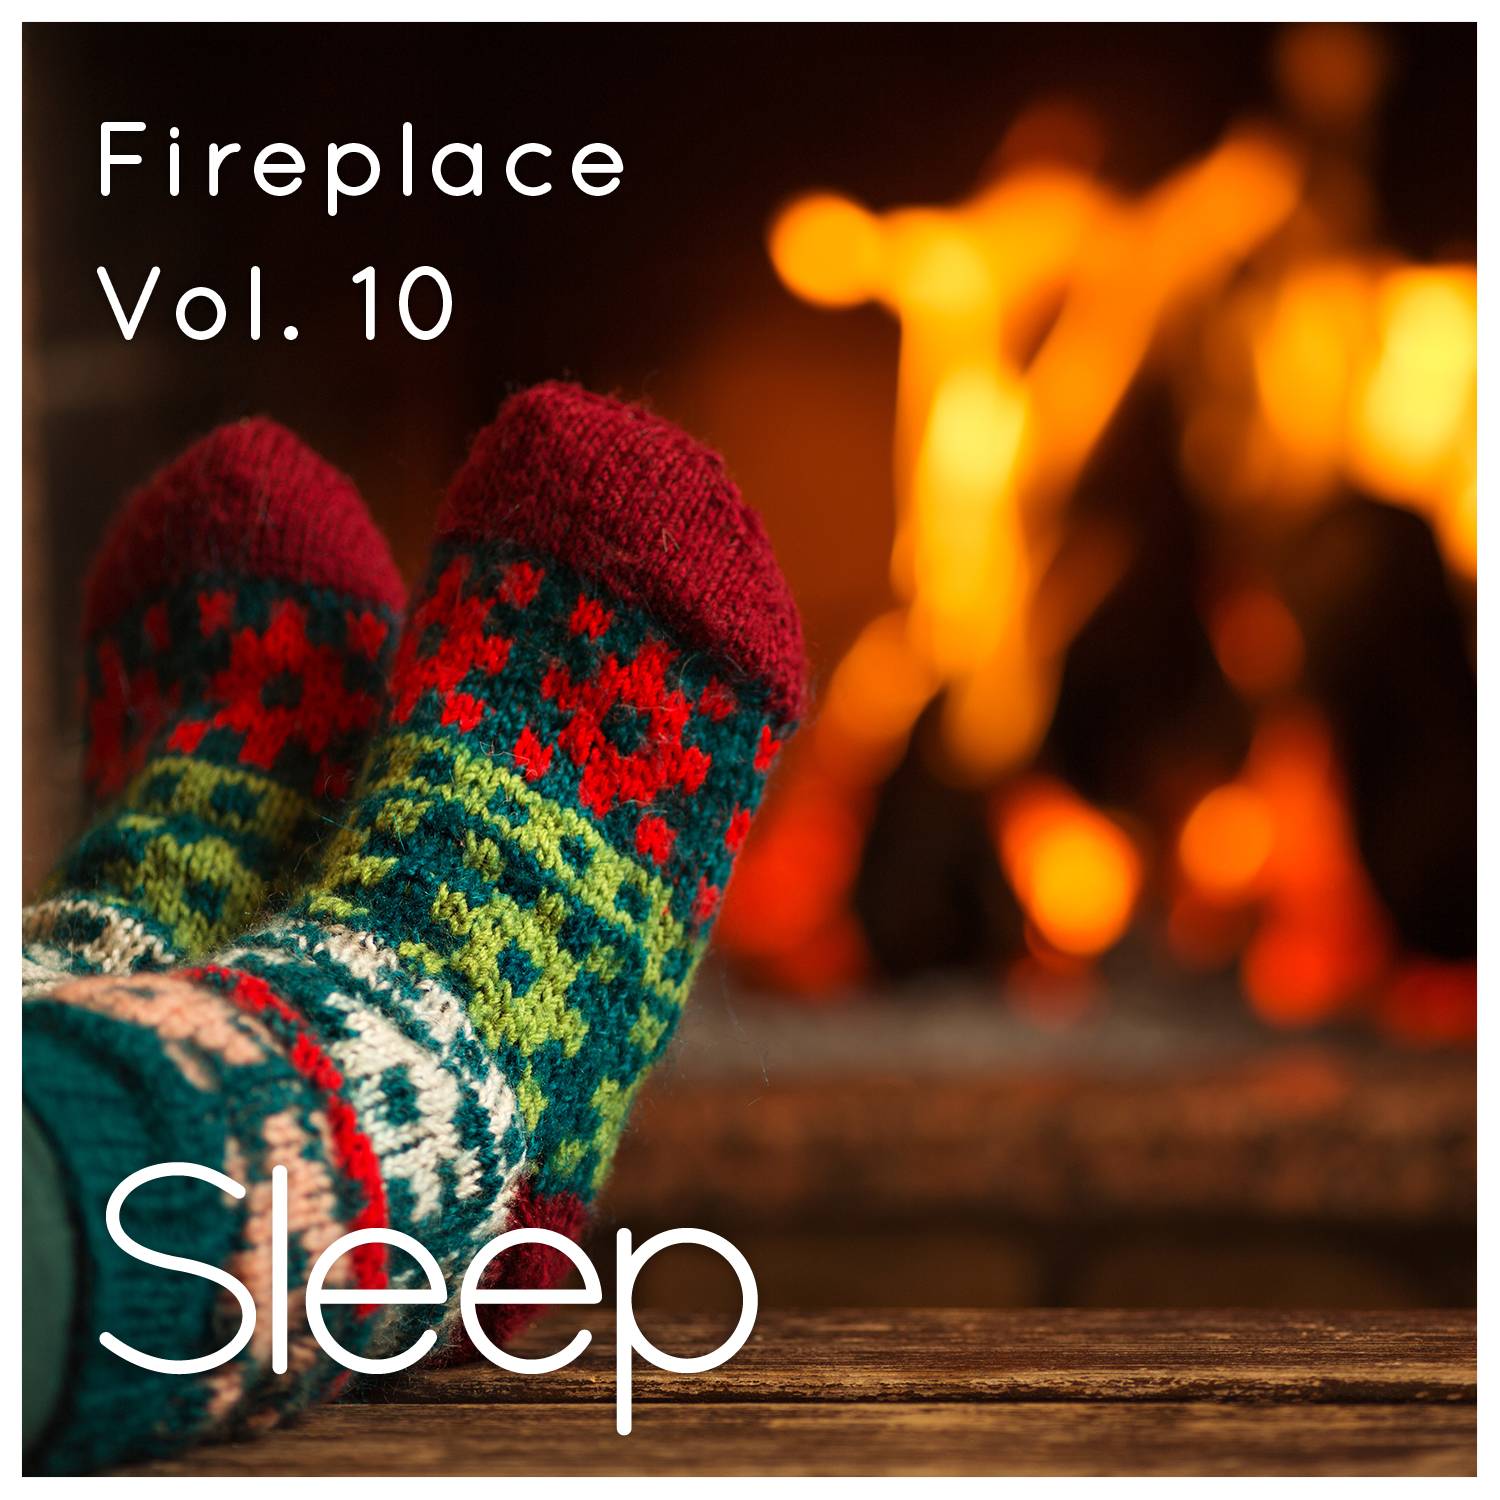 Sleep by Fireplace in Cabin, Vol. 10